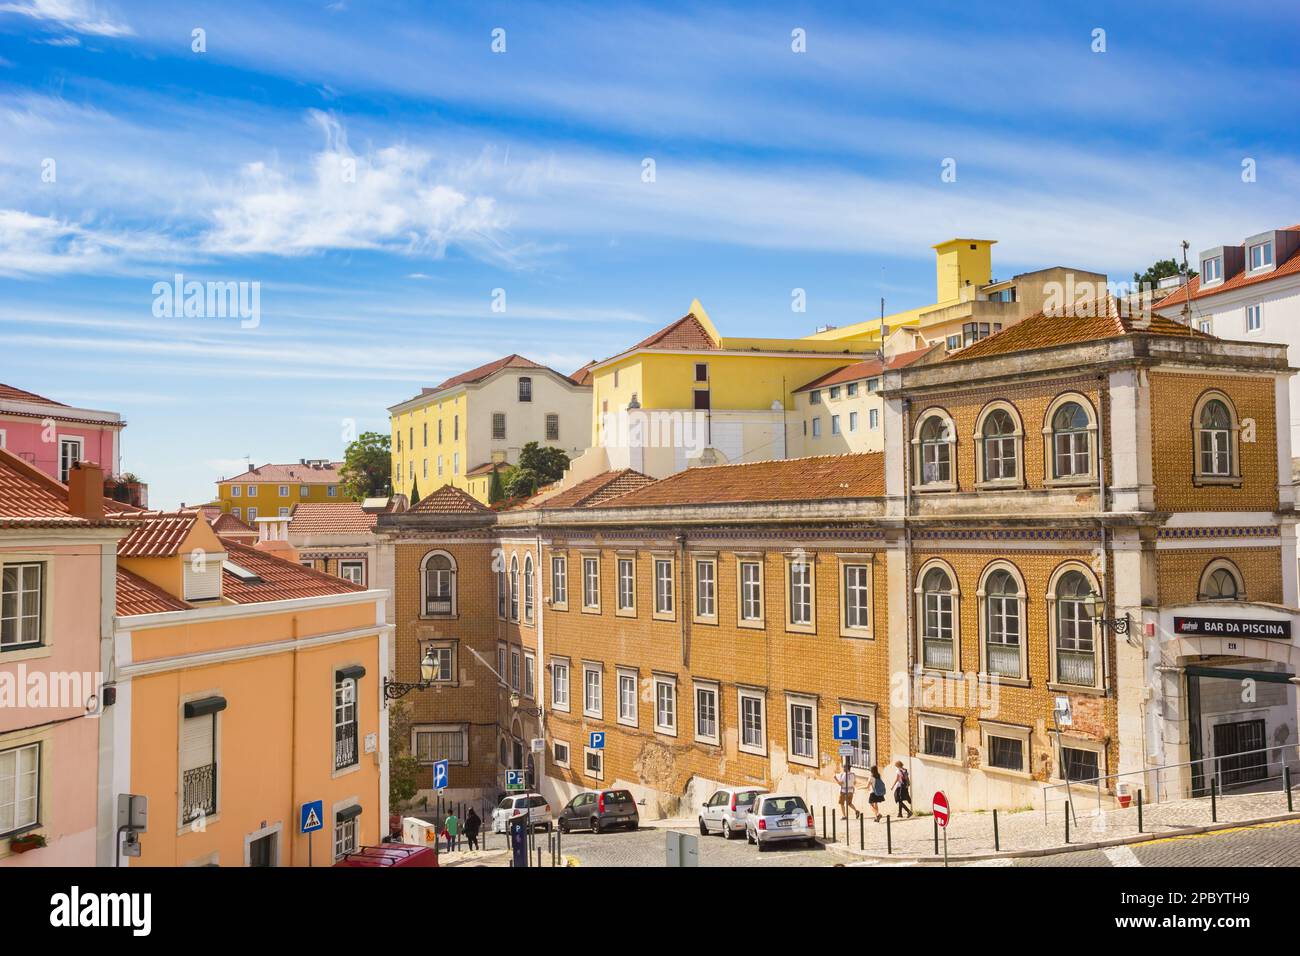 Traditional portuguese architecture on the hill in Lisbon, Portugal Stock Photo